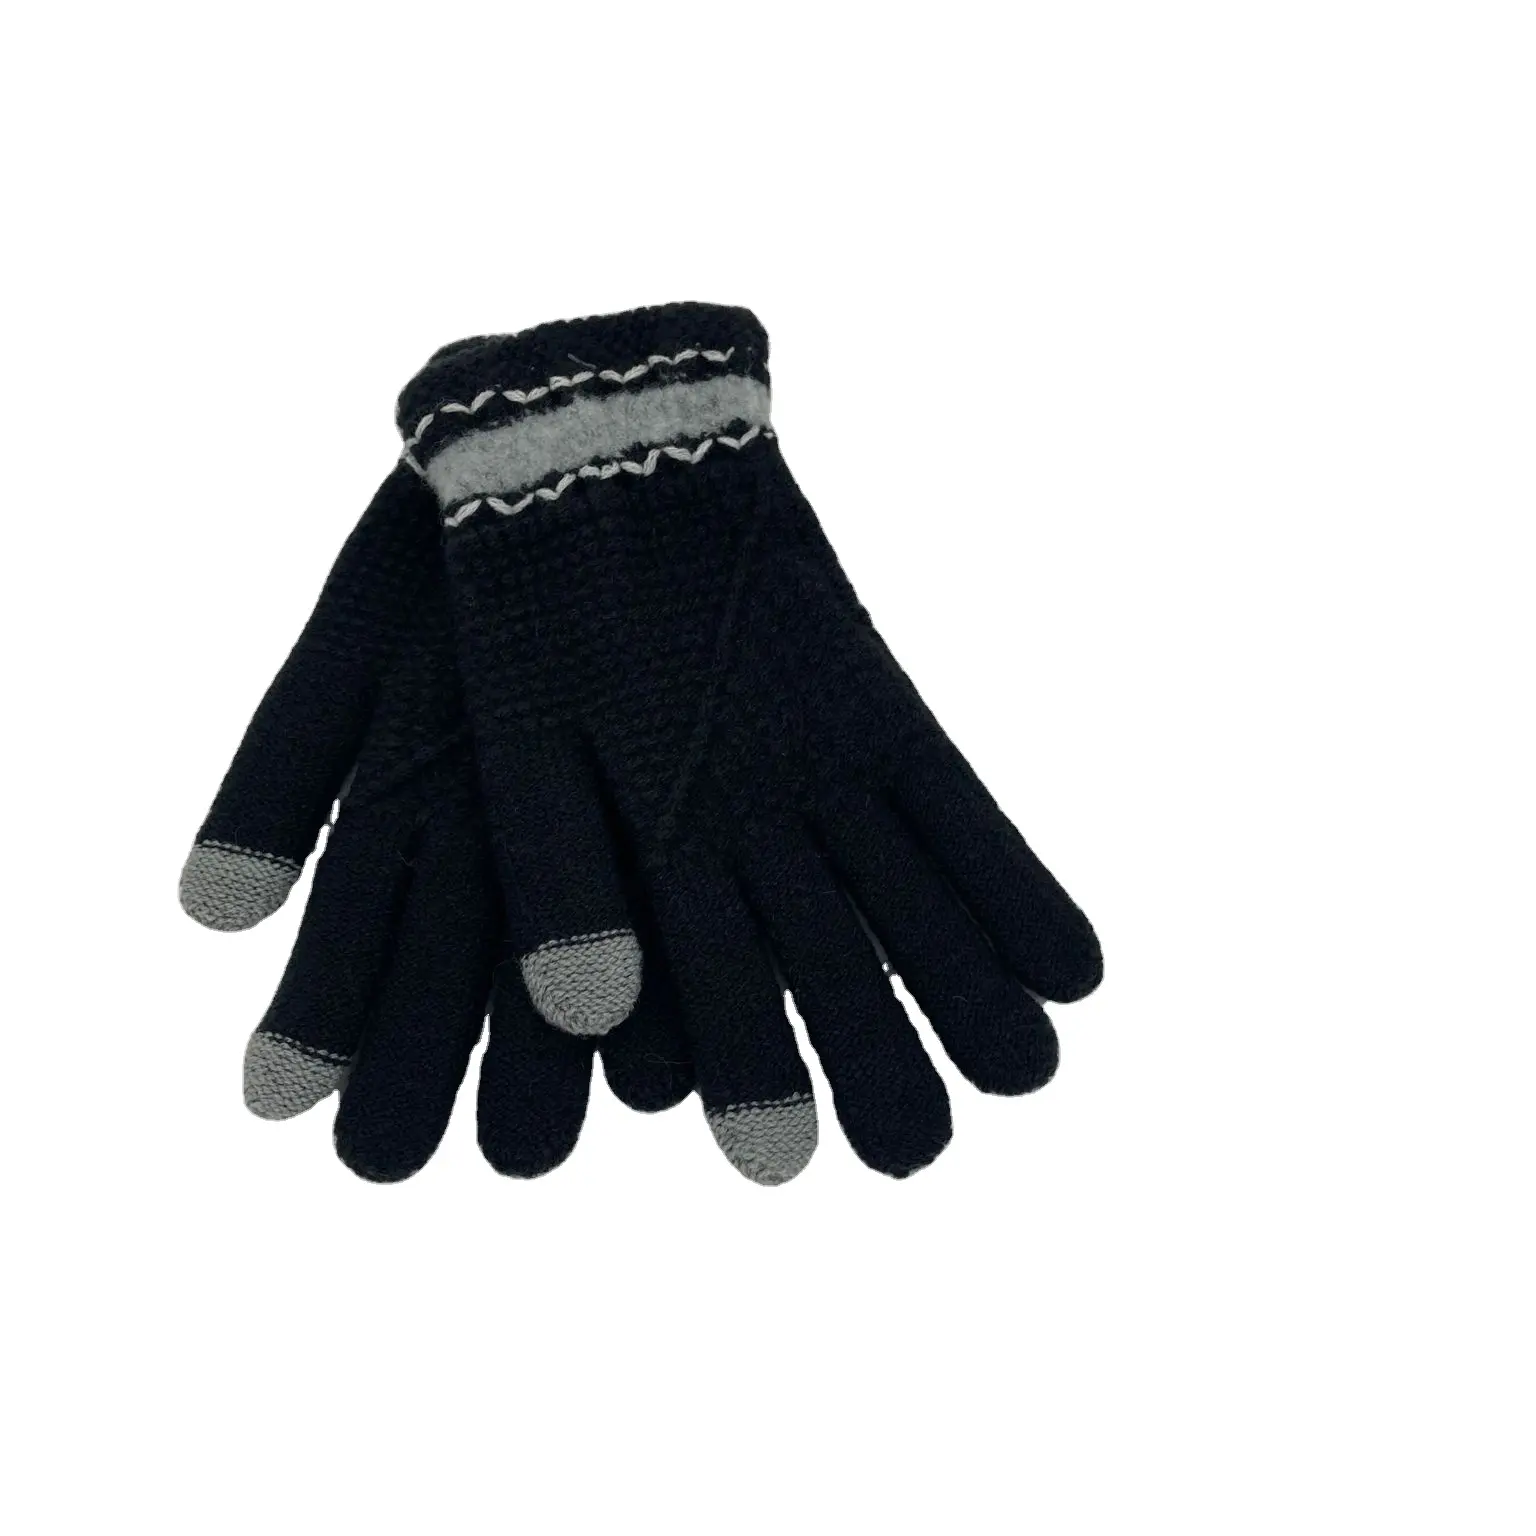 Female full fingers cycling gloves windproof thermal five finger touch screen winter gloves